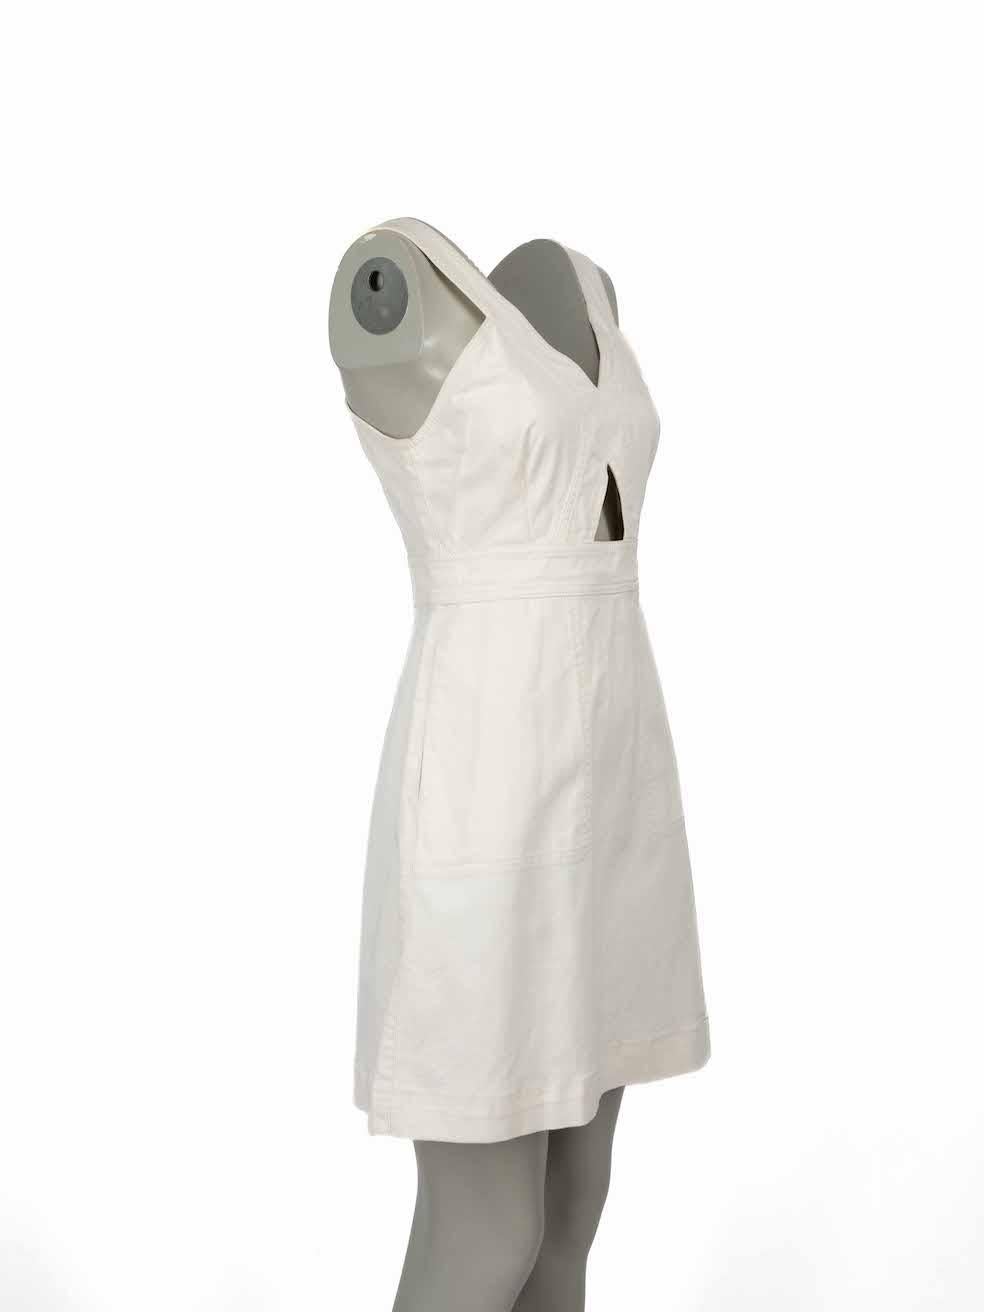 CONDITION is Very good. Minimal wear to dress is evident. Minimal wear to fabric finish with some very light discolouration around interior neckline and under the arms on this used Stella McCartney designer resale item.
 
Details
White
Cotton